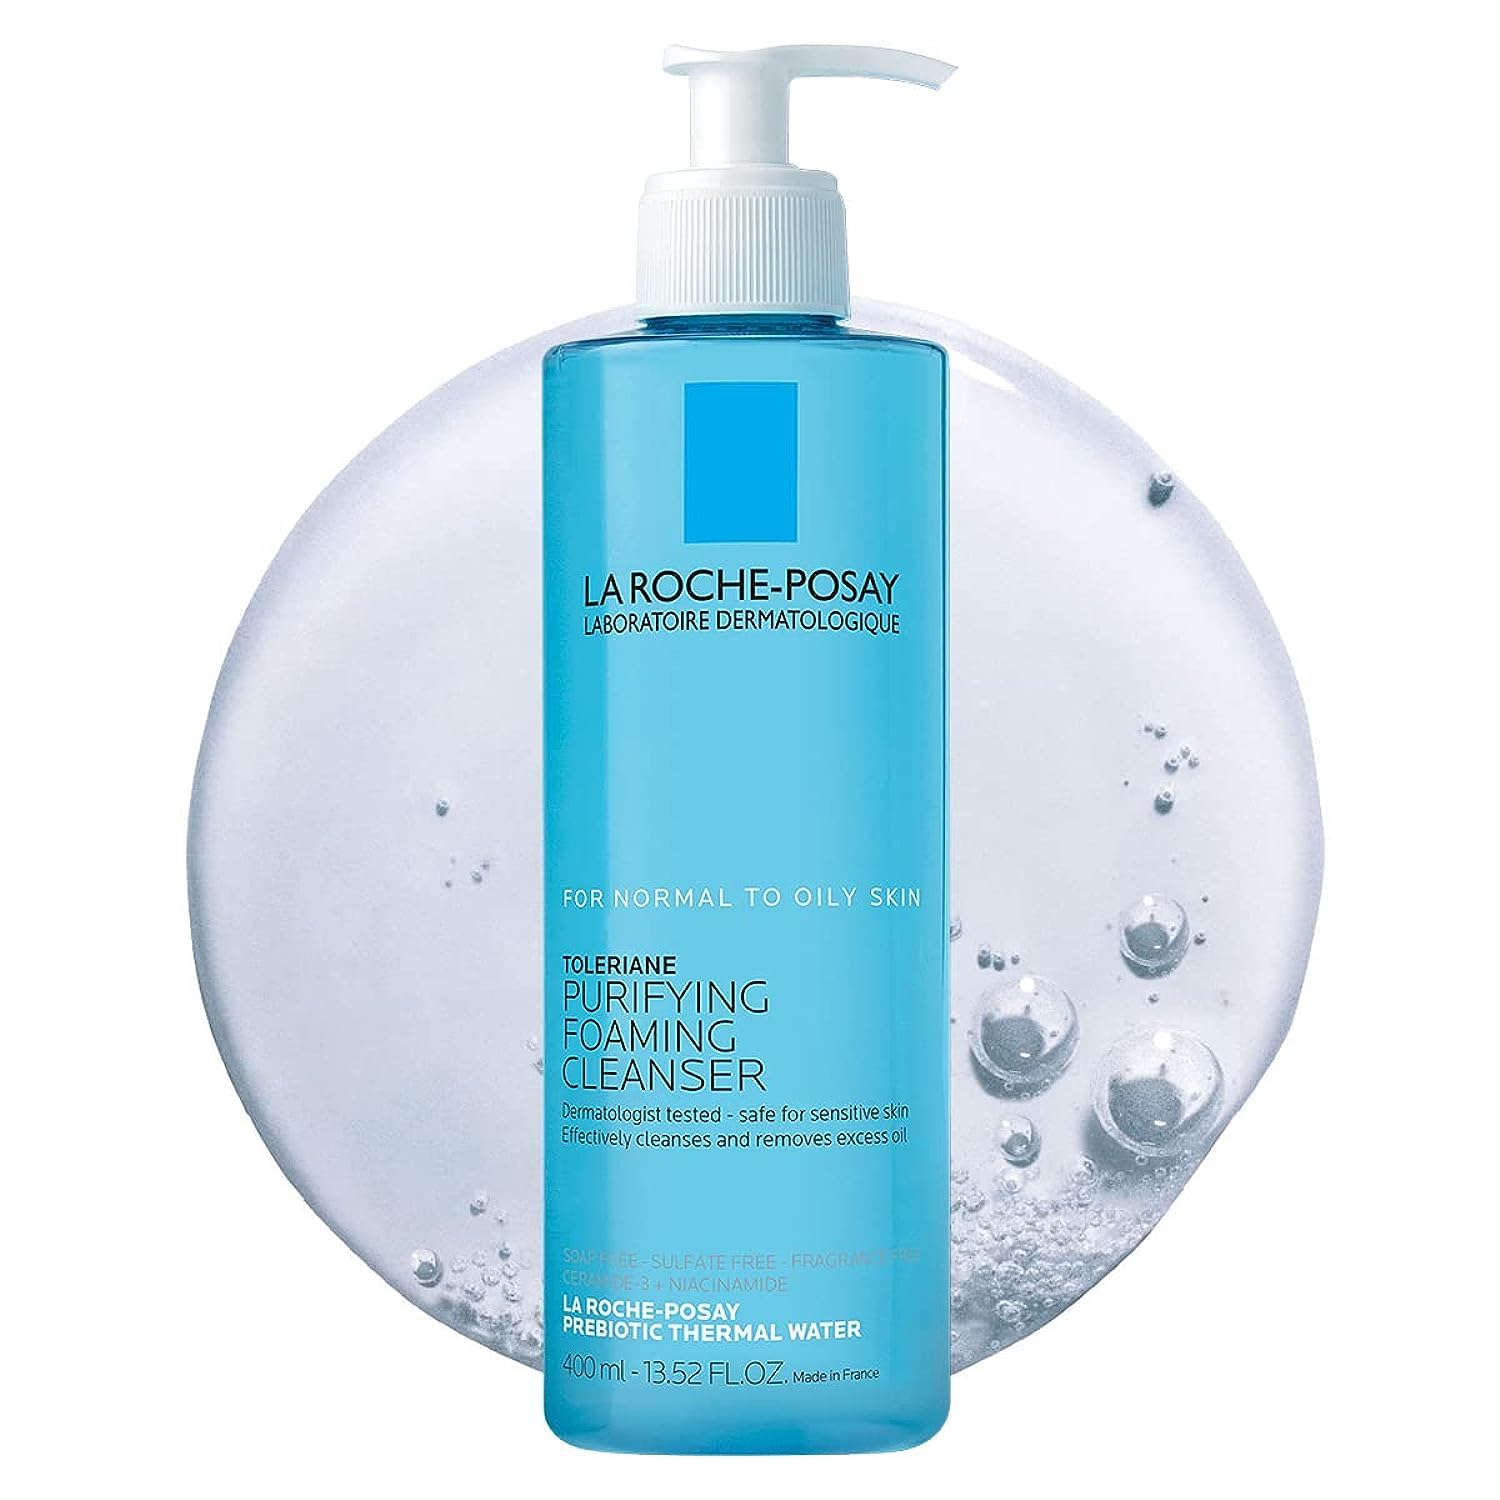 La Roche-Posay Toleriane Purifying Foaming Facial Cleanser, Oil Free Face Wash for Oily Skin and for Sensitive Skin with Niacinamide, Pore Cleanser Won’t Dry Out Skin, Unscented